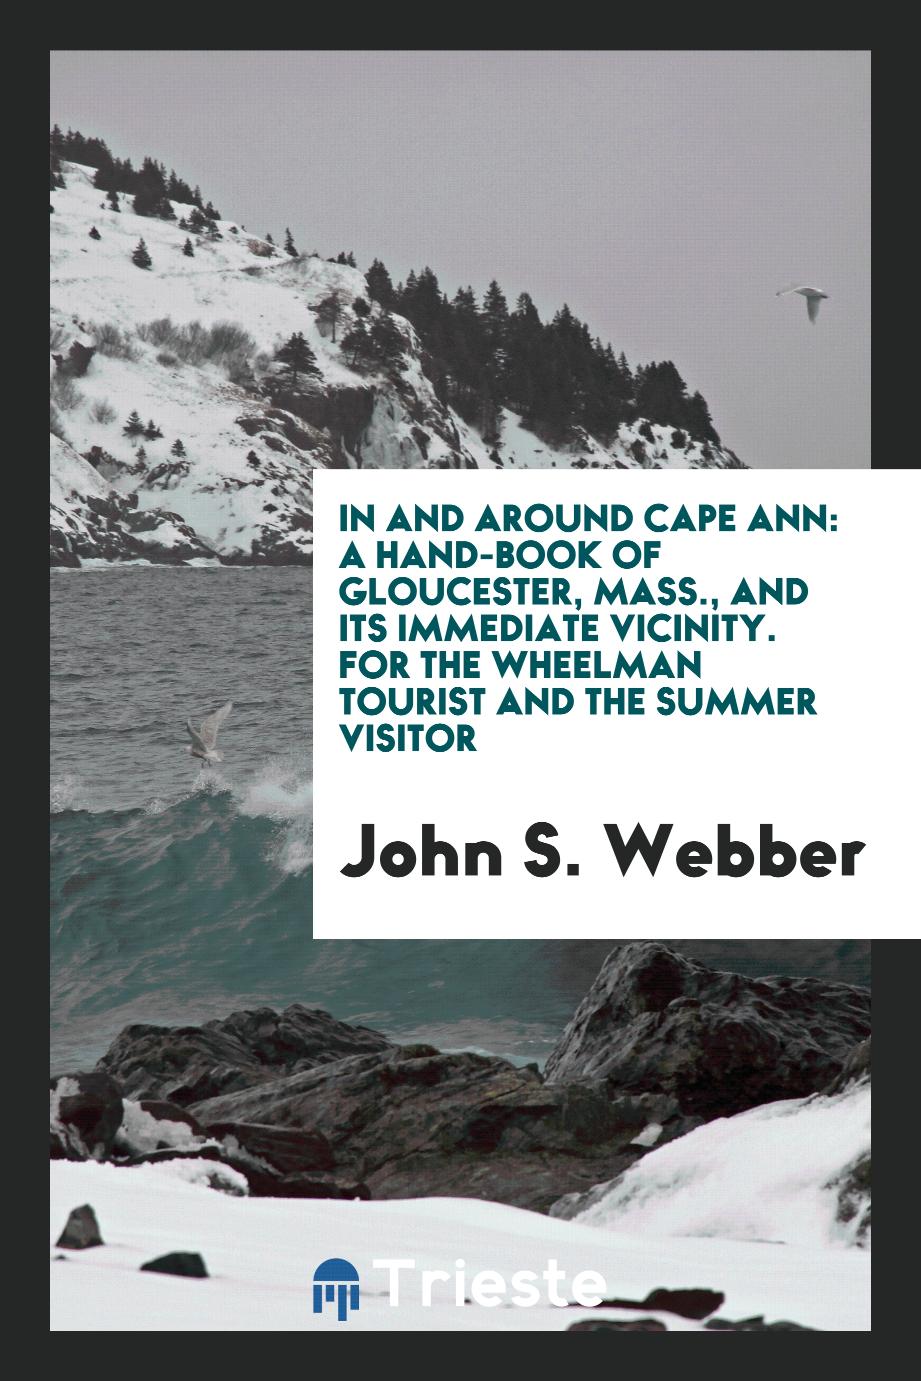 In and Around Cape Ann: A Hand-Book of Gloucester, Mass., and Its Immediate Vicinity. For the Wheelman Tourist and the Summer Visitor